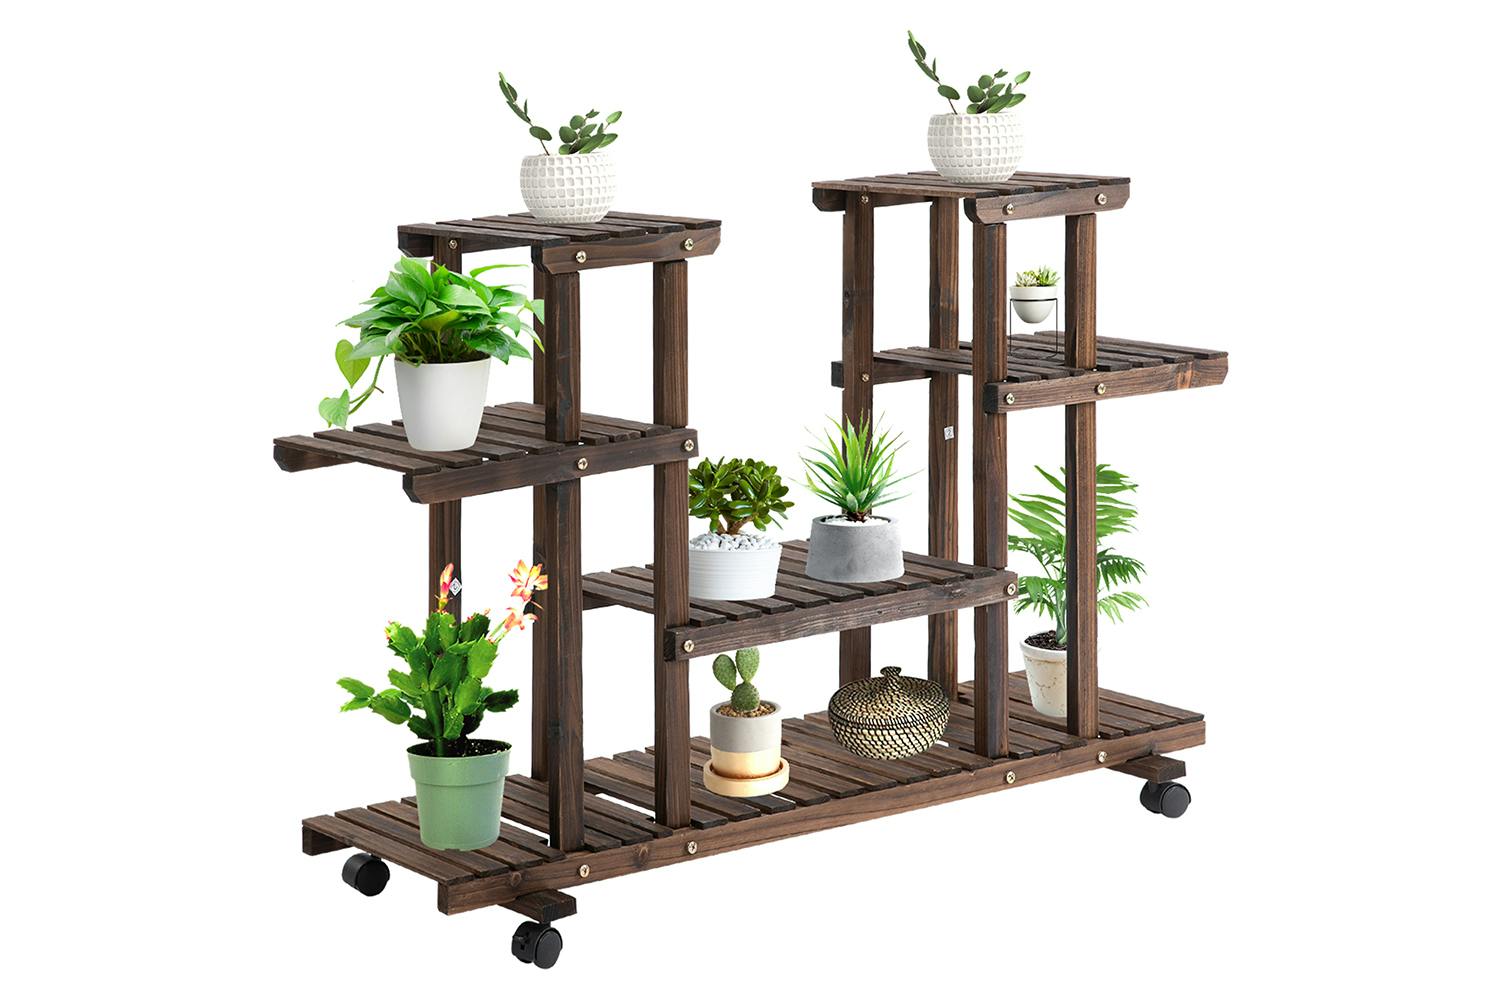 Outsunny Outdoor Flower Display Stand | Carbon